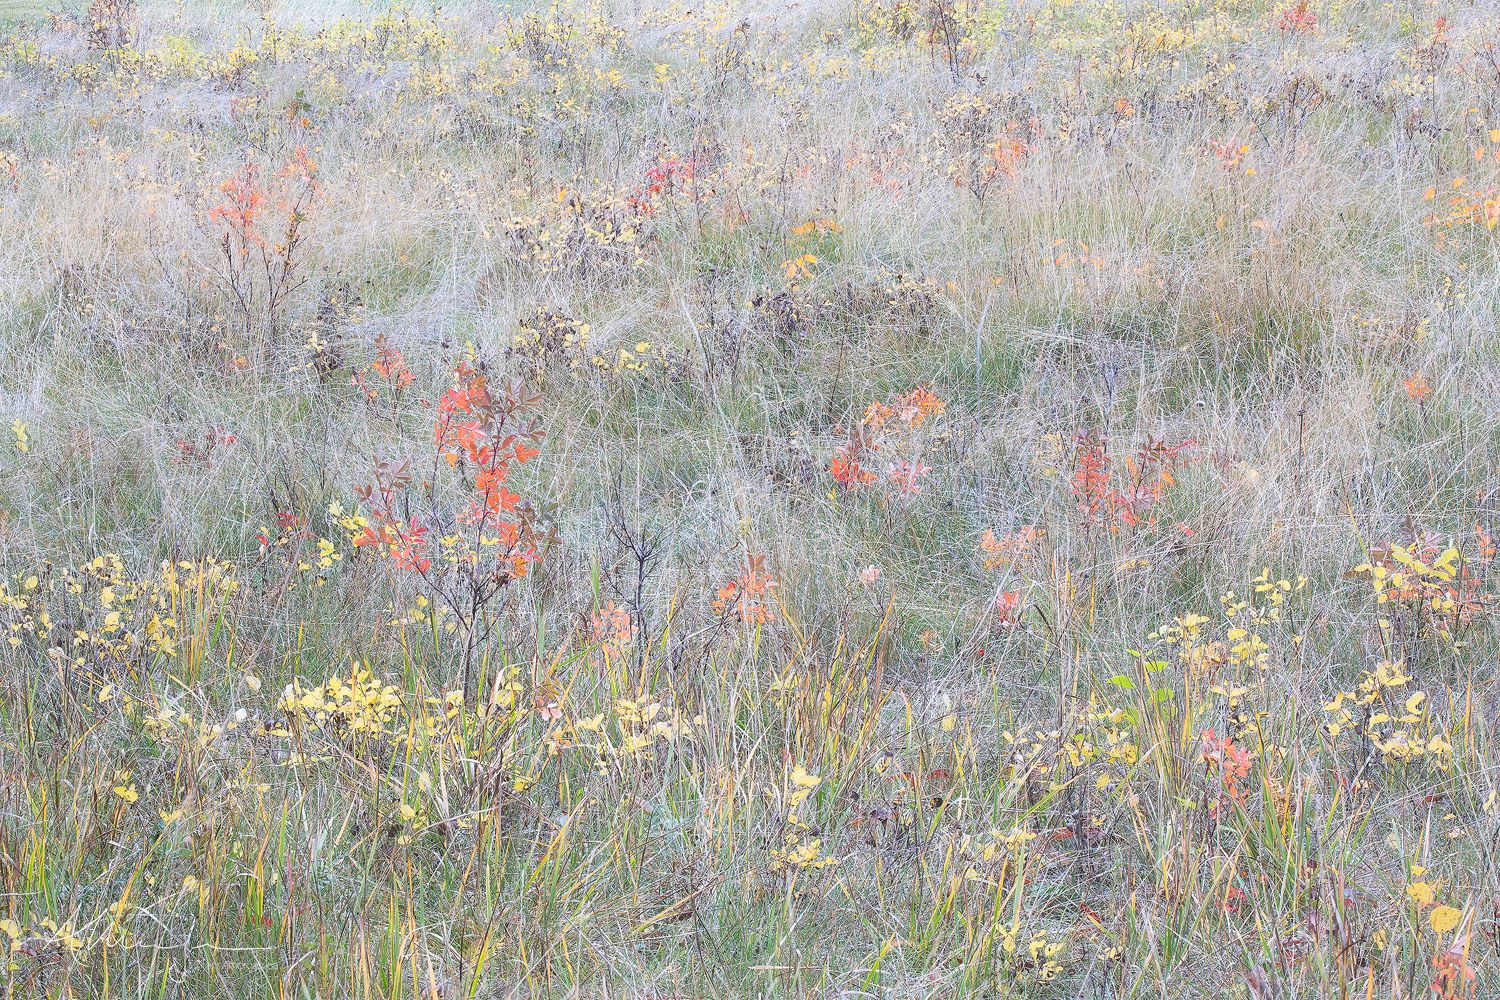 Delicate and poetic grasses and autumn wild roses in Jasper National Park